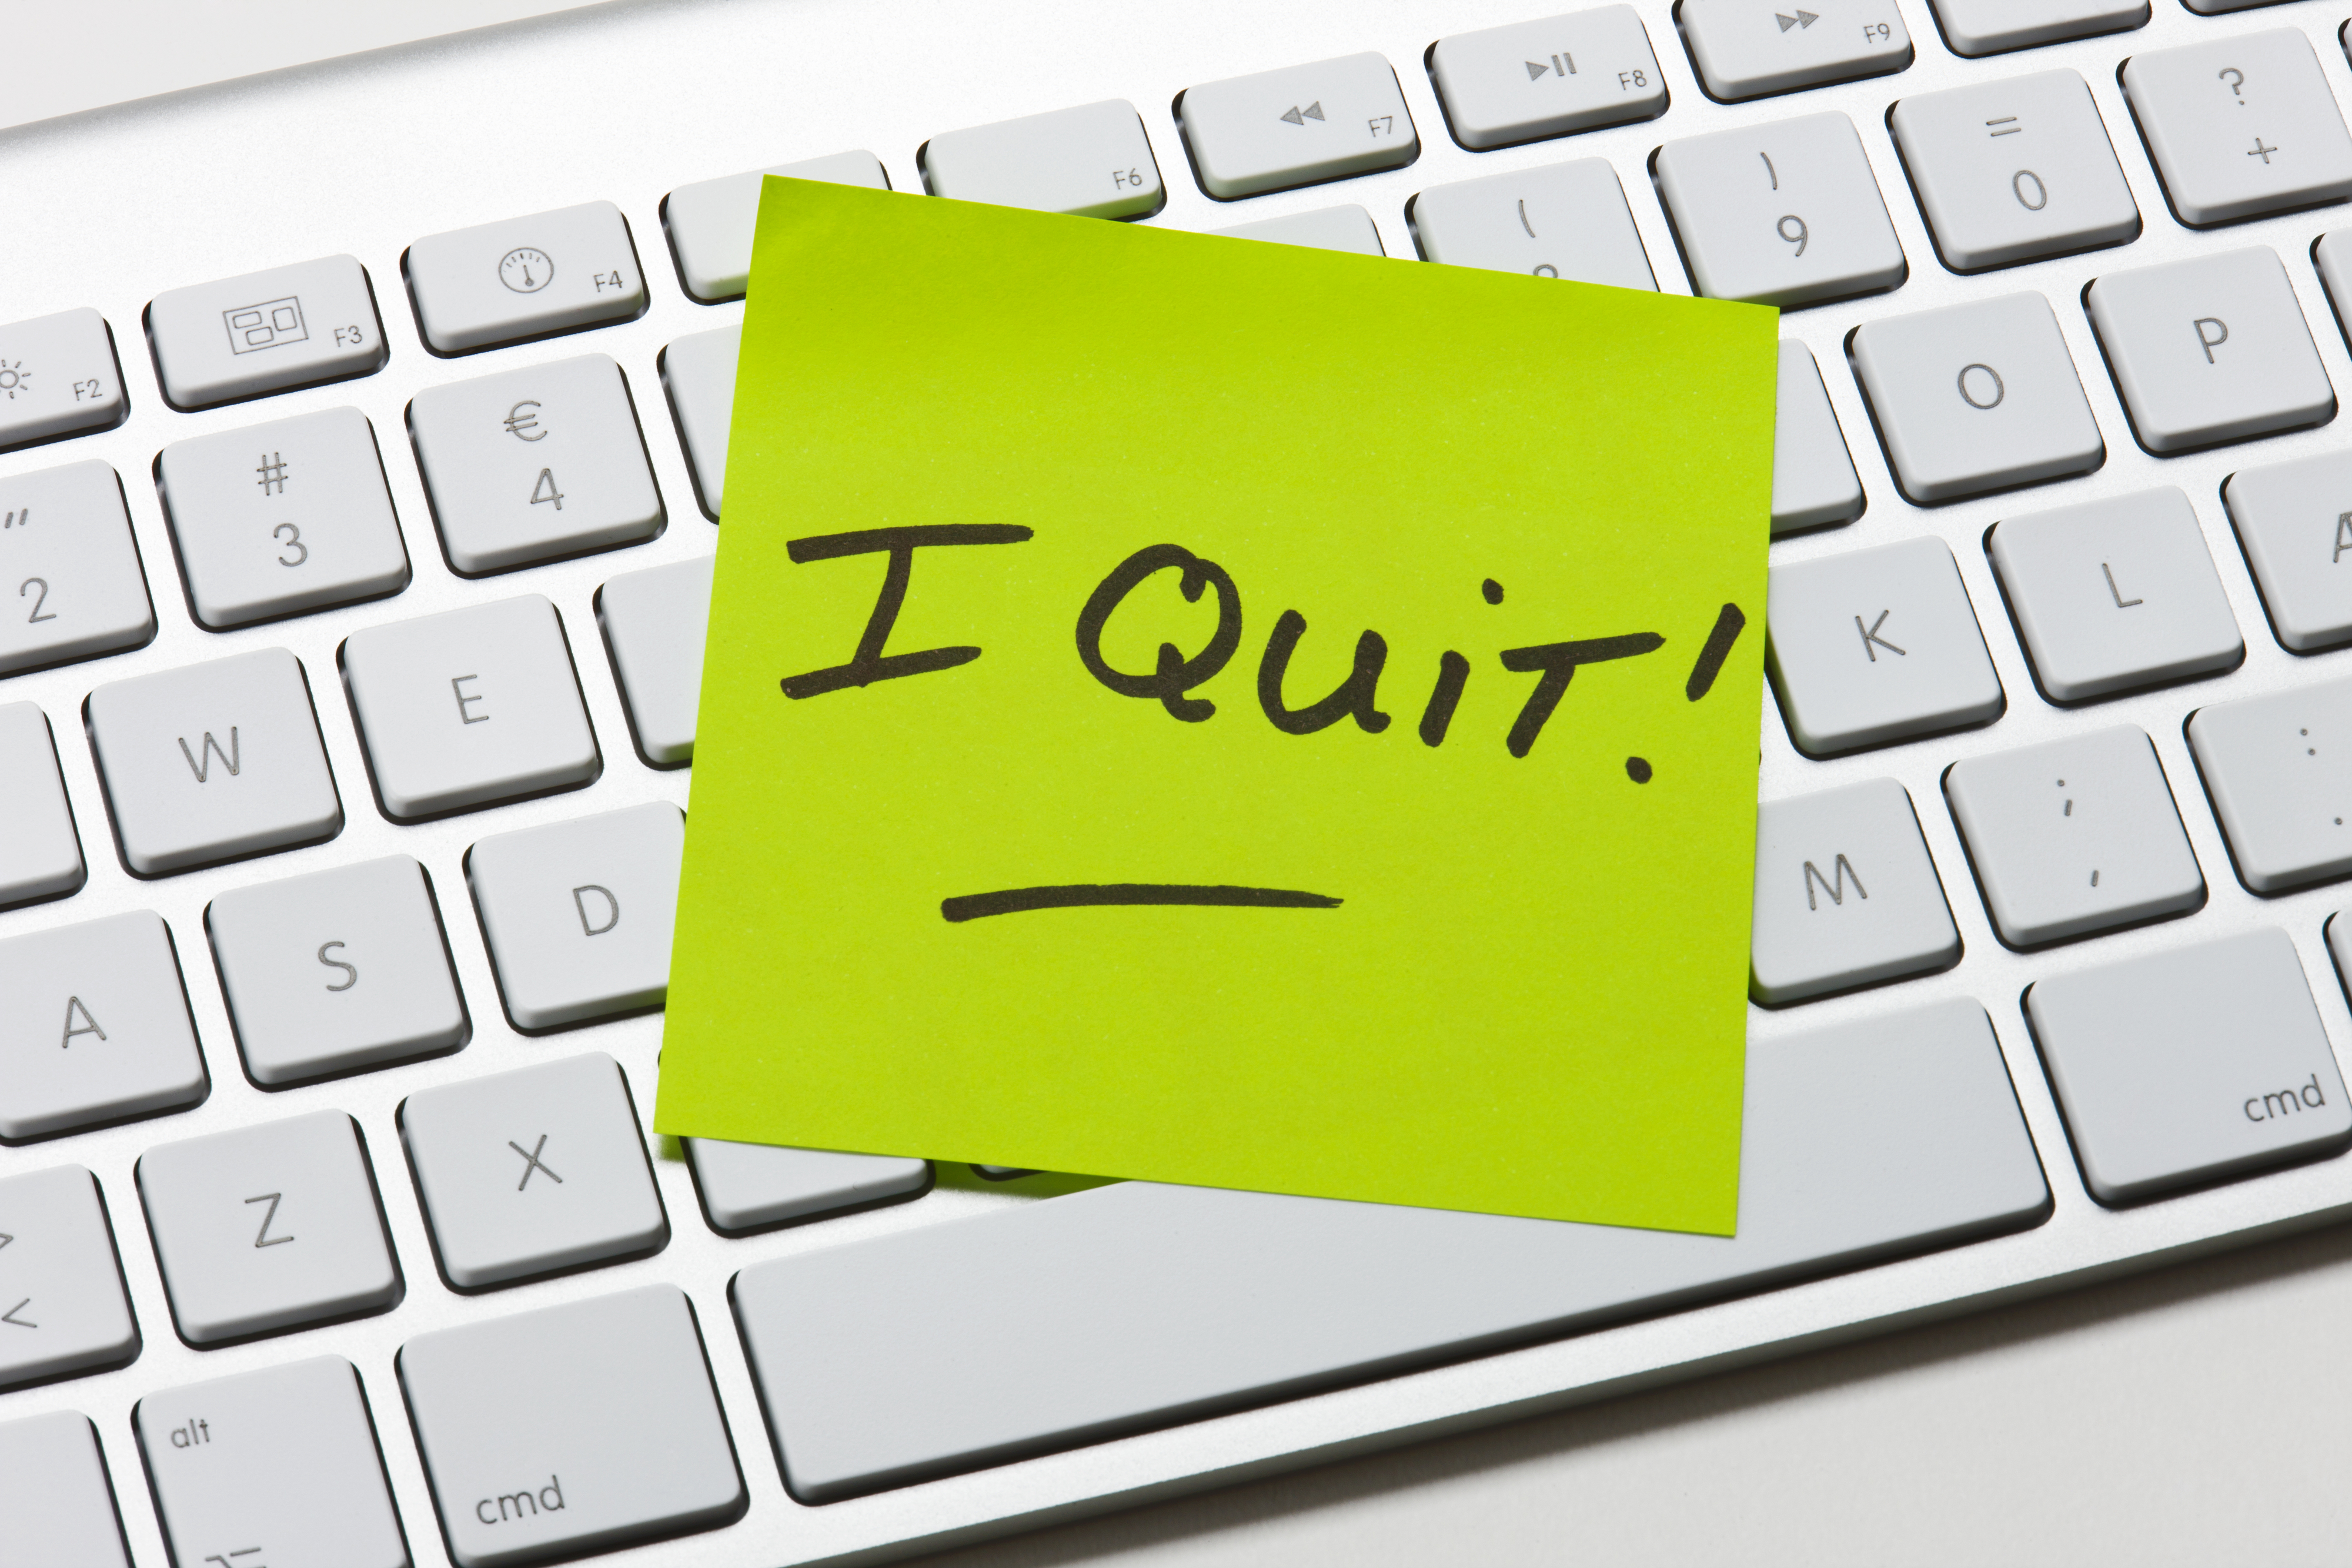 Post-it note with &quot;I Quit!&quot; handwritten, placed on a computer keyboard, indicating resignation